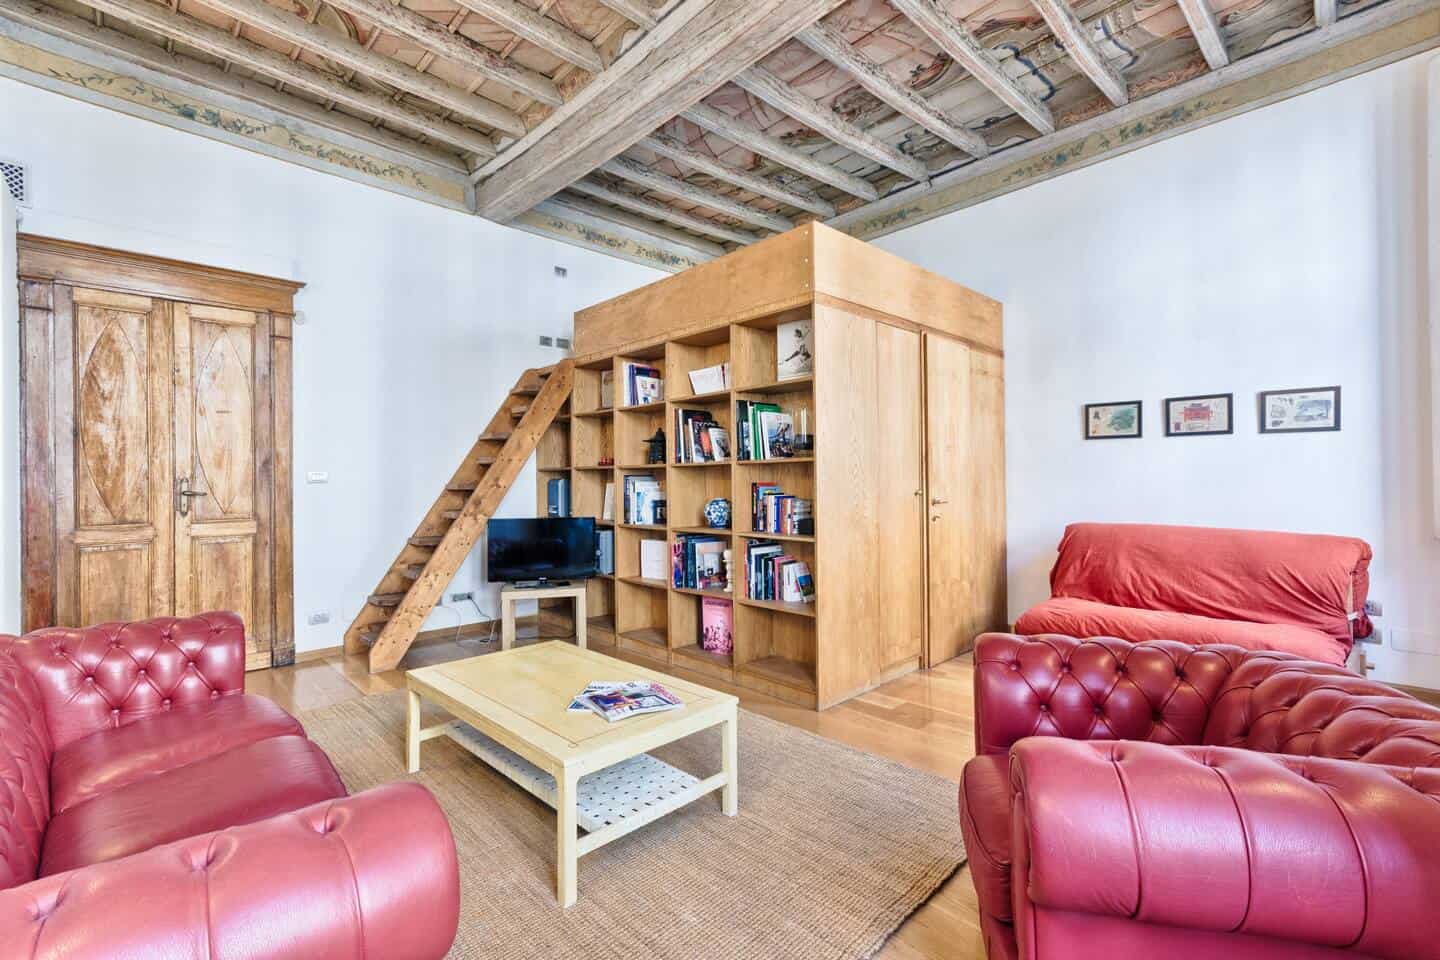 Image of Airbnb rental in Turin, Italy